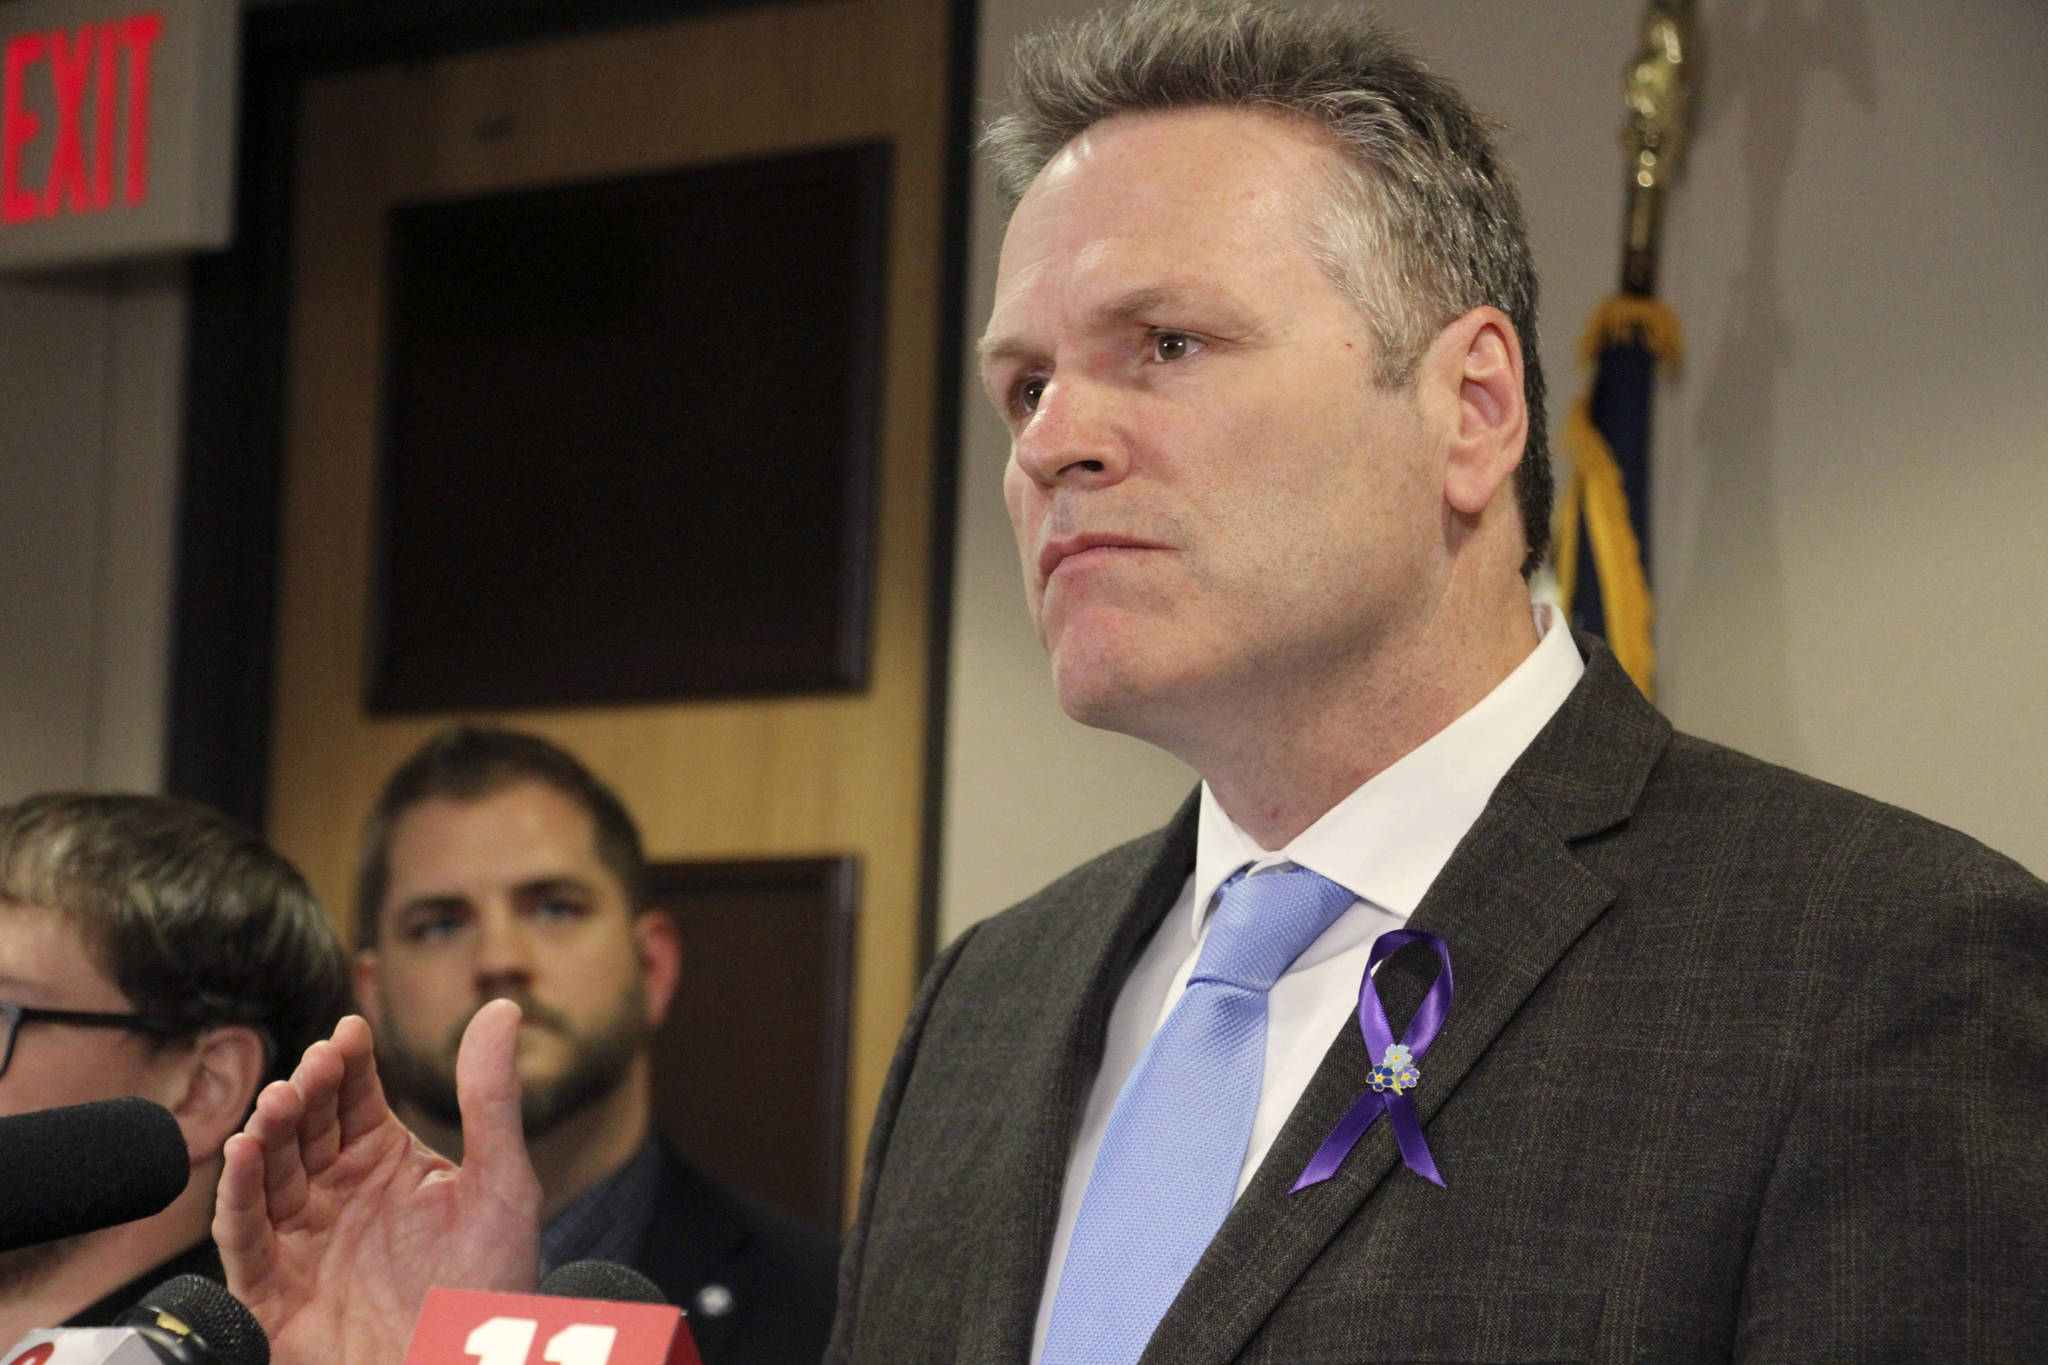 In this March 12, 2020 file photo, Alaska Gov. Mike Dunleavy speaks during a news conference in Anchorage, Alaska. Dunleavy faces criticism for his handling of COVID-19, from those who think he’s not doing enough to address rising case counts to those who think he’s been overreaching. (AP Photo/Mark Thiessen, File)